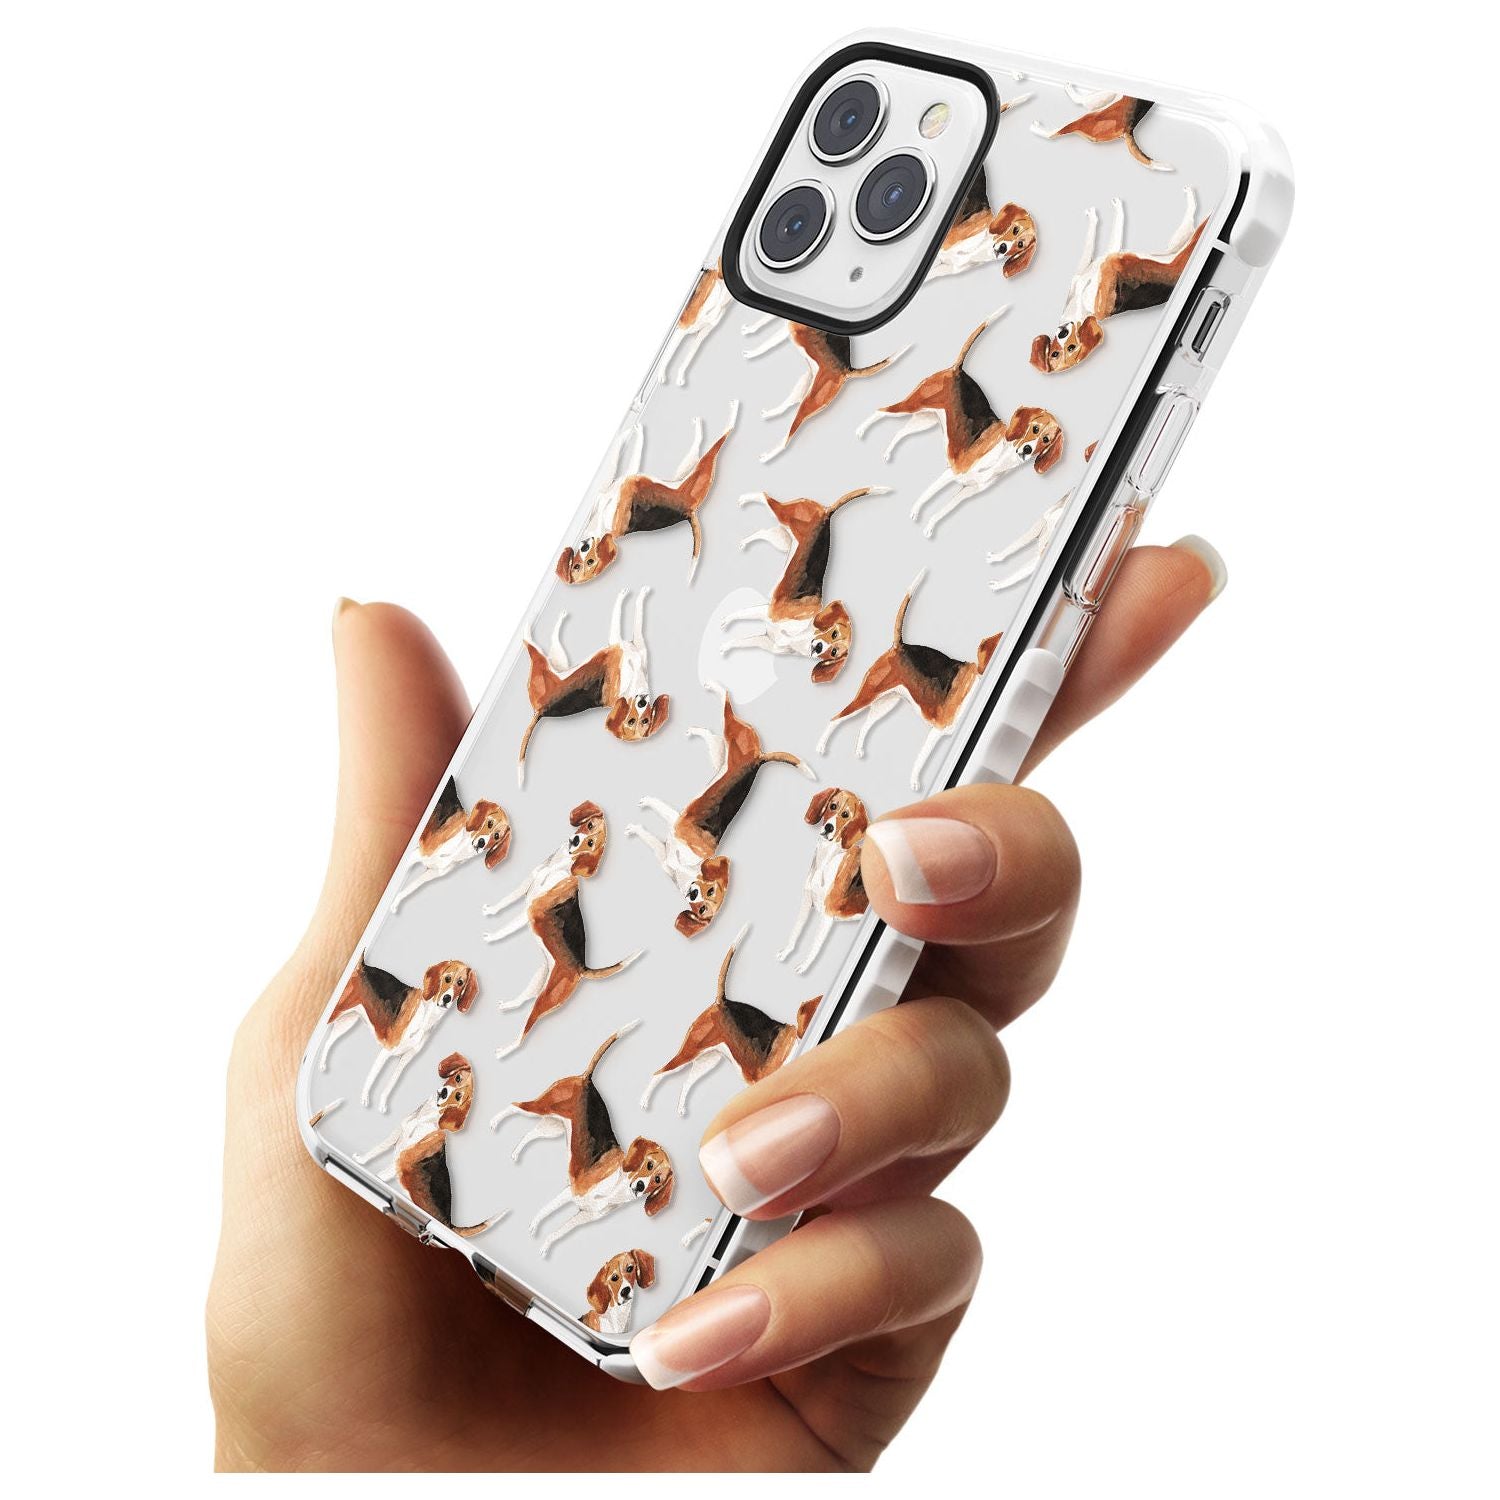 Beagle Watercolour Dog Pattern Impact Phone Case for iPhone 11 Pro Max